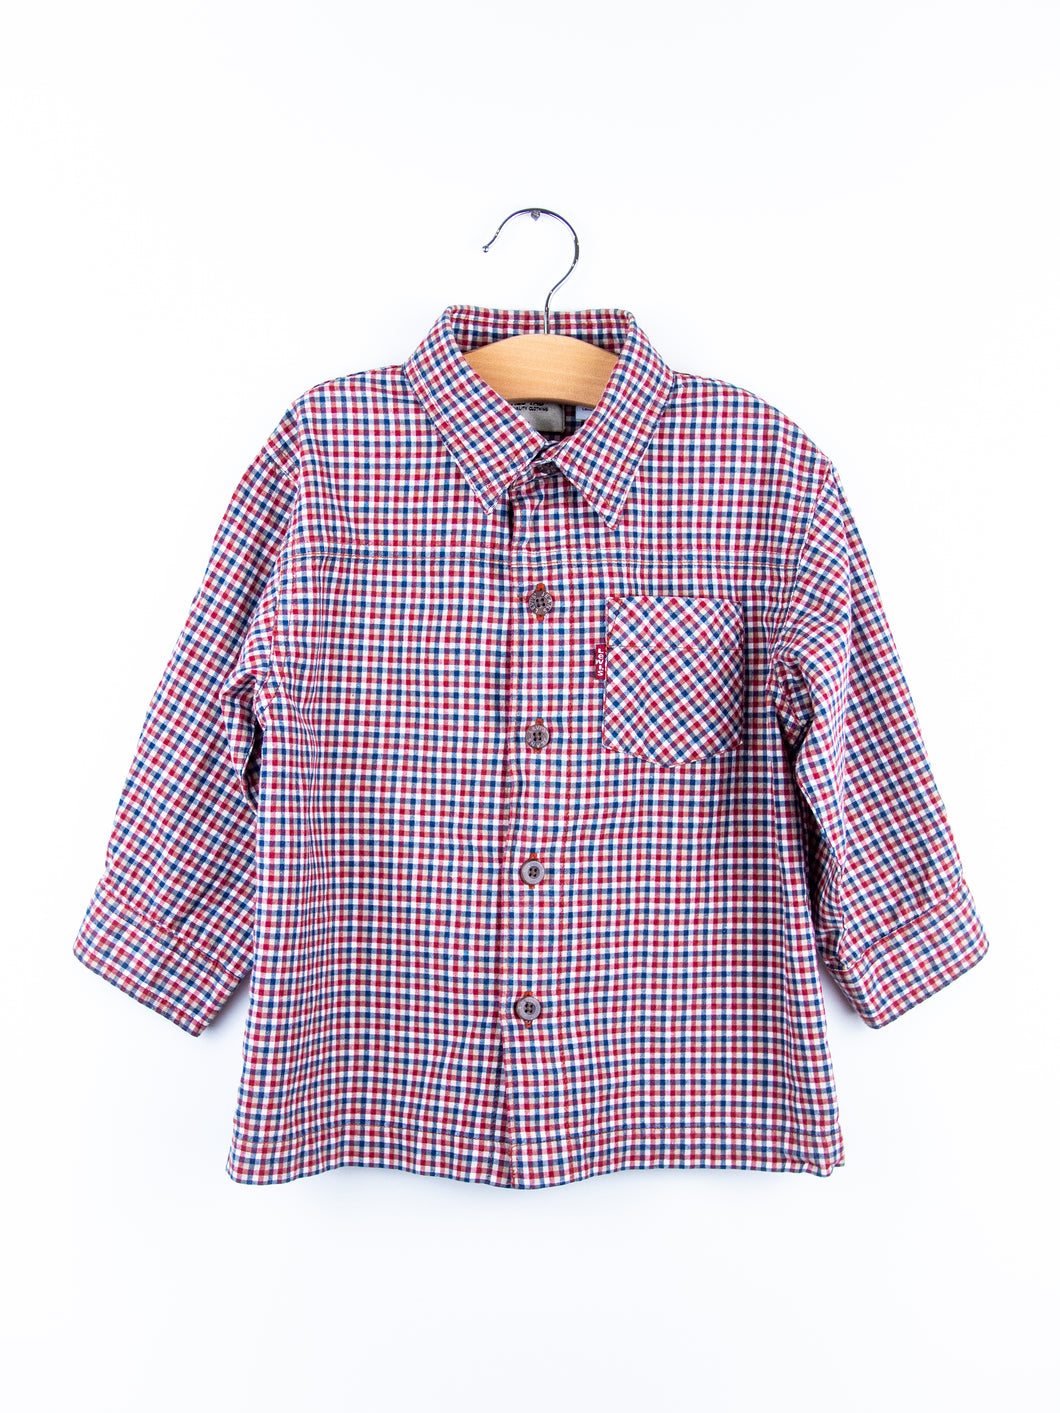 Levi's Red & Navy Check Shirt - Age 2T